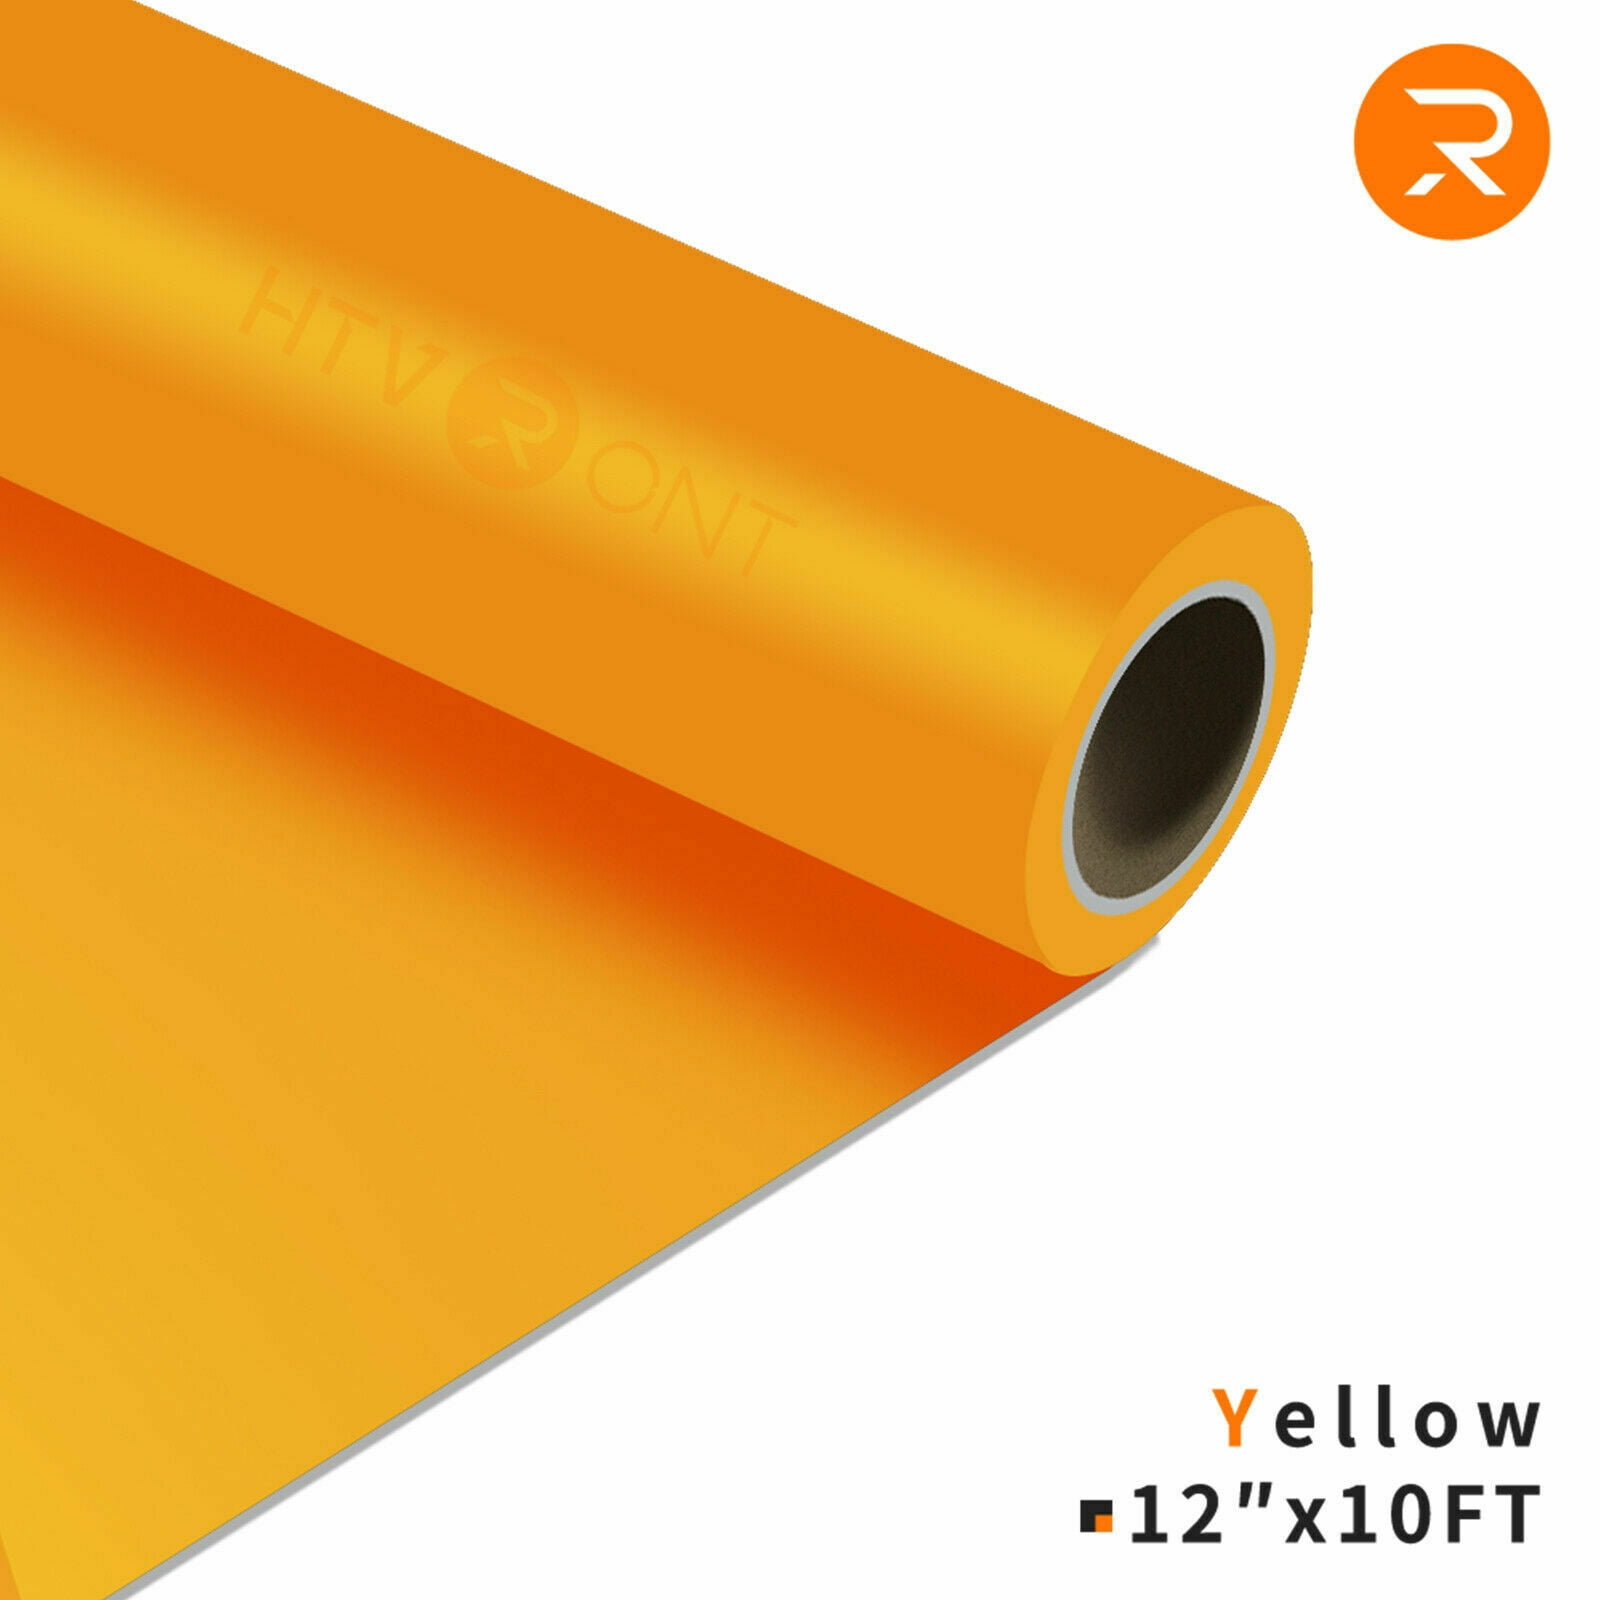  HTVRONT HTV Vinyl Rolls Heat Transfer Vinyl - 12 x 8ft Yellow  HTV Vinyl for Shirts, Iron on Vinyl for All Cutter Machine - Easy to Cut &  Weed for Heat